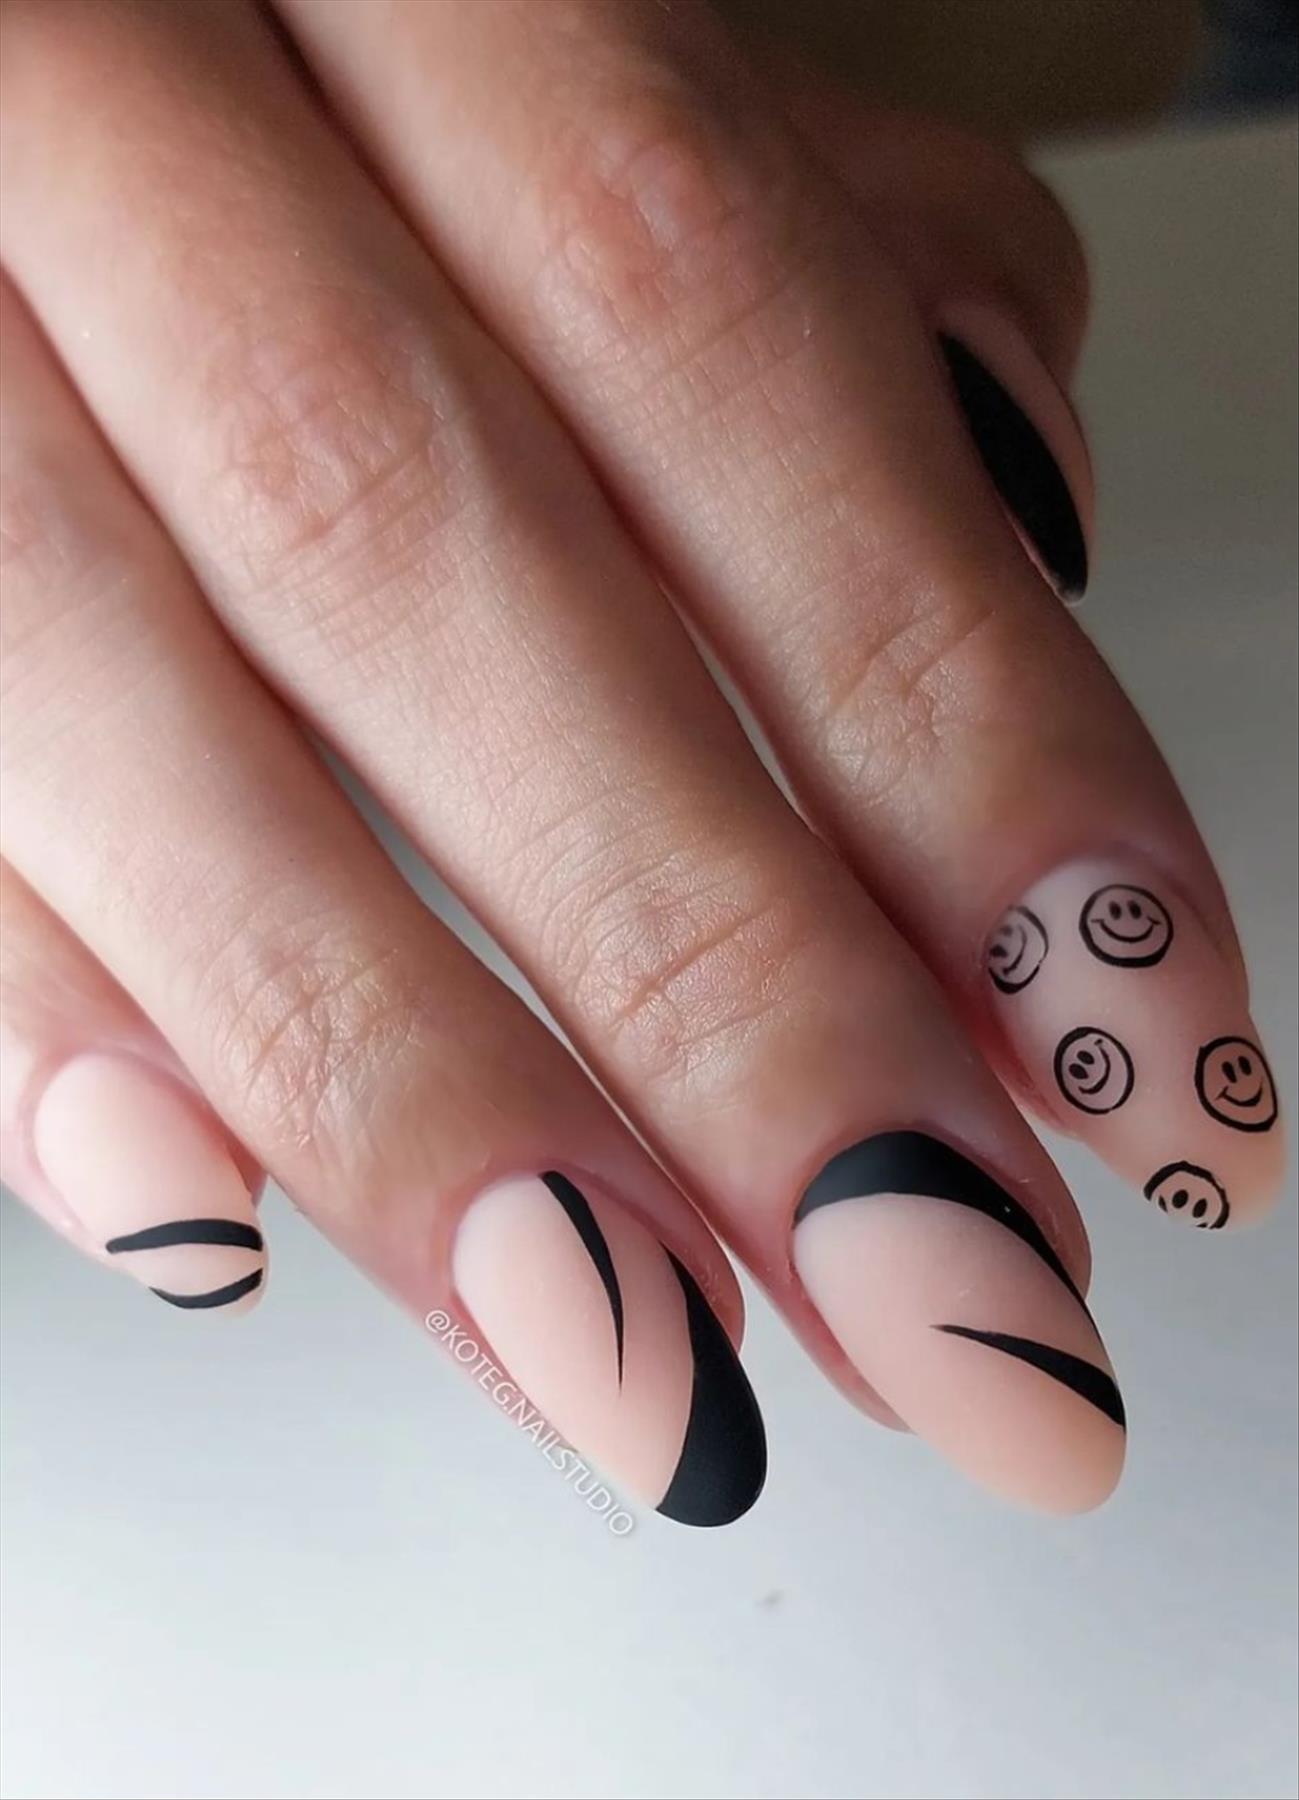 Elegant Black Nail Art Designs to Keep Your Style On Point